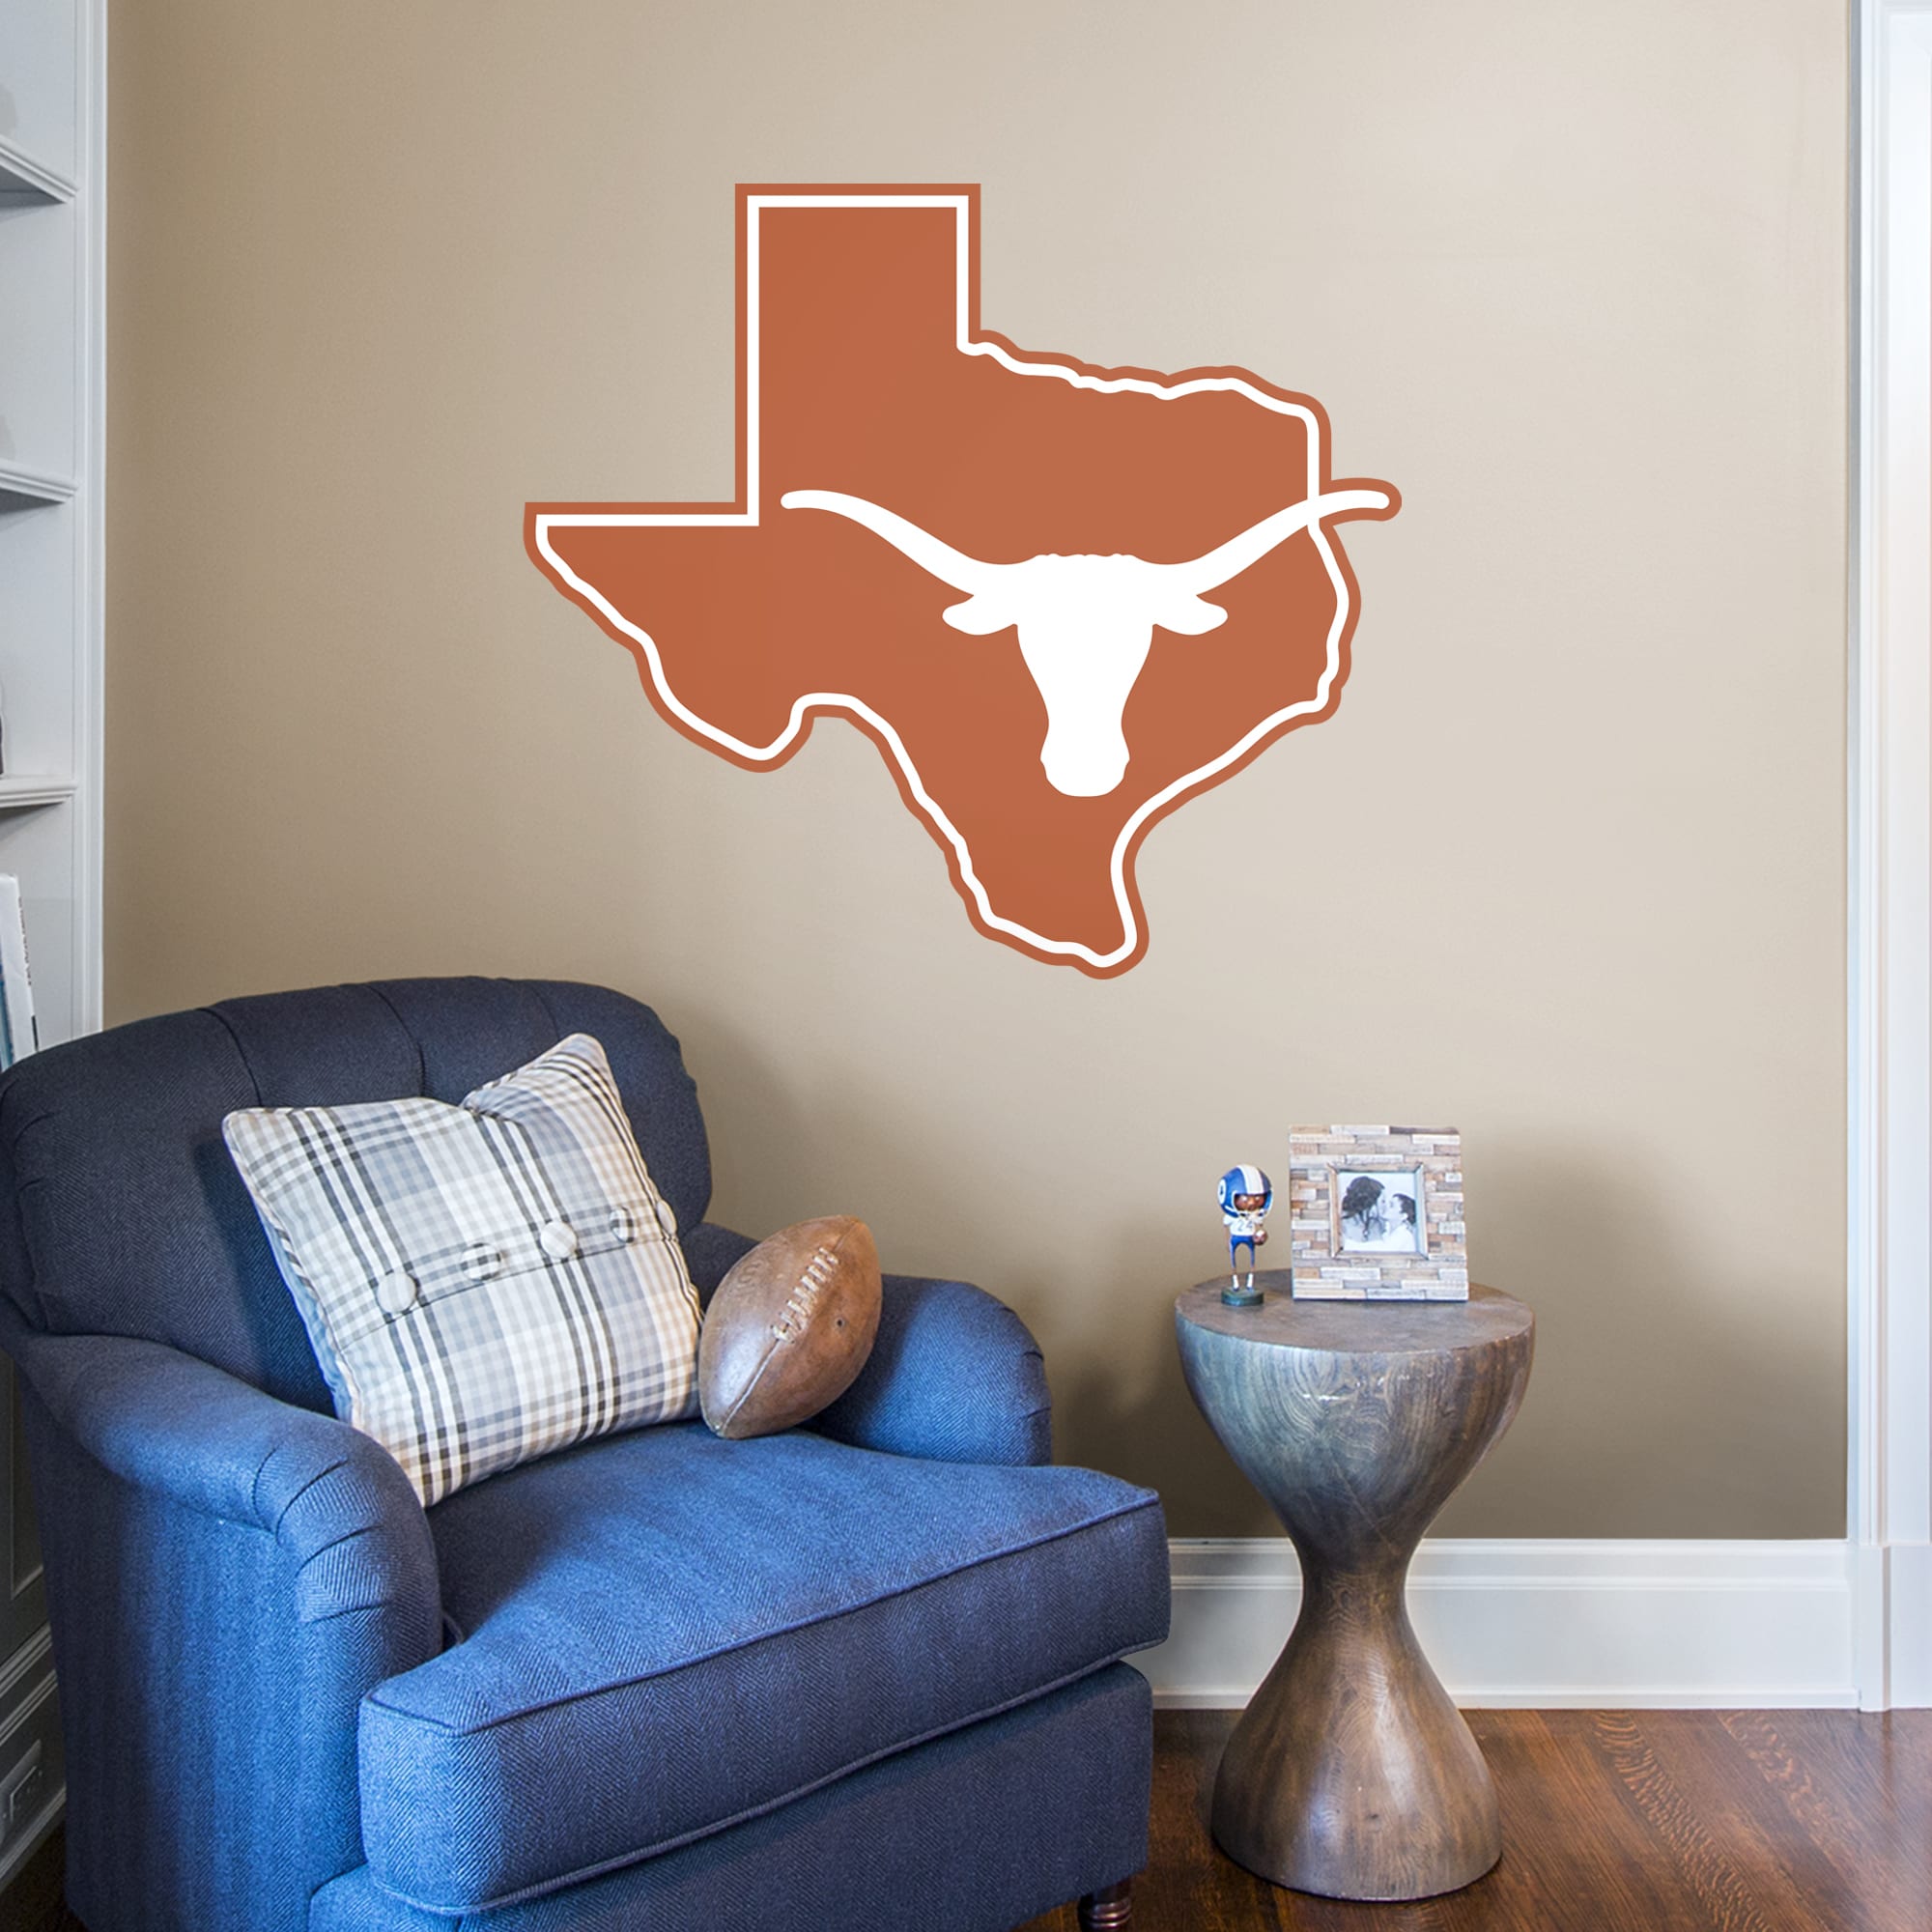 Texas Longhorns: State of Texas - Officially Licensed Removable Wall Decal Giant Logo + 12 Decals (40"W x 38"H) by Fathead | Vin